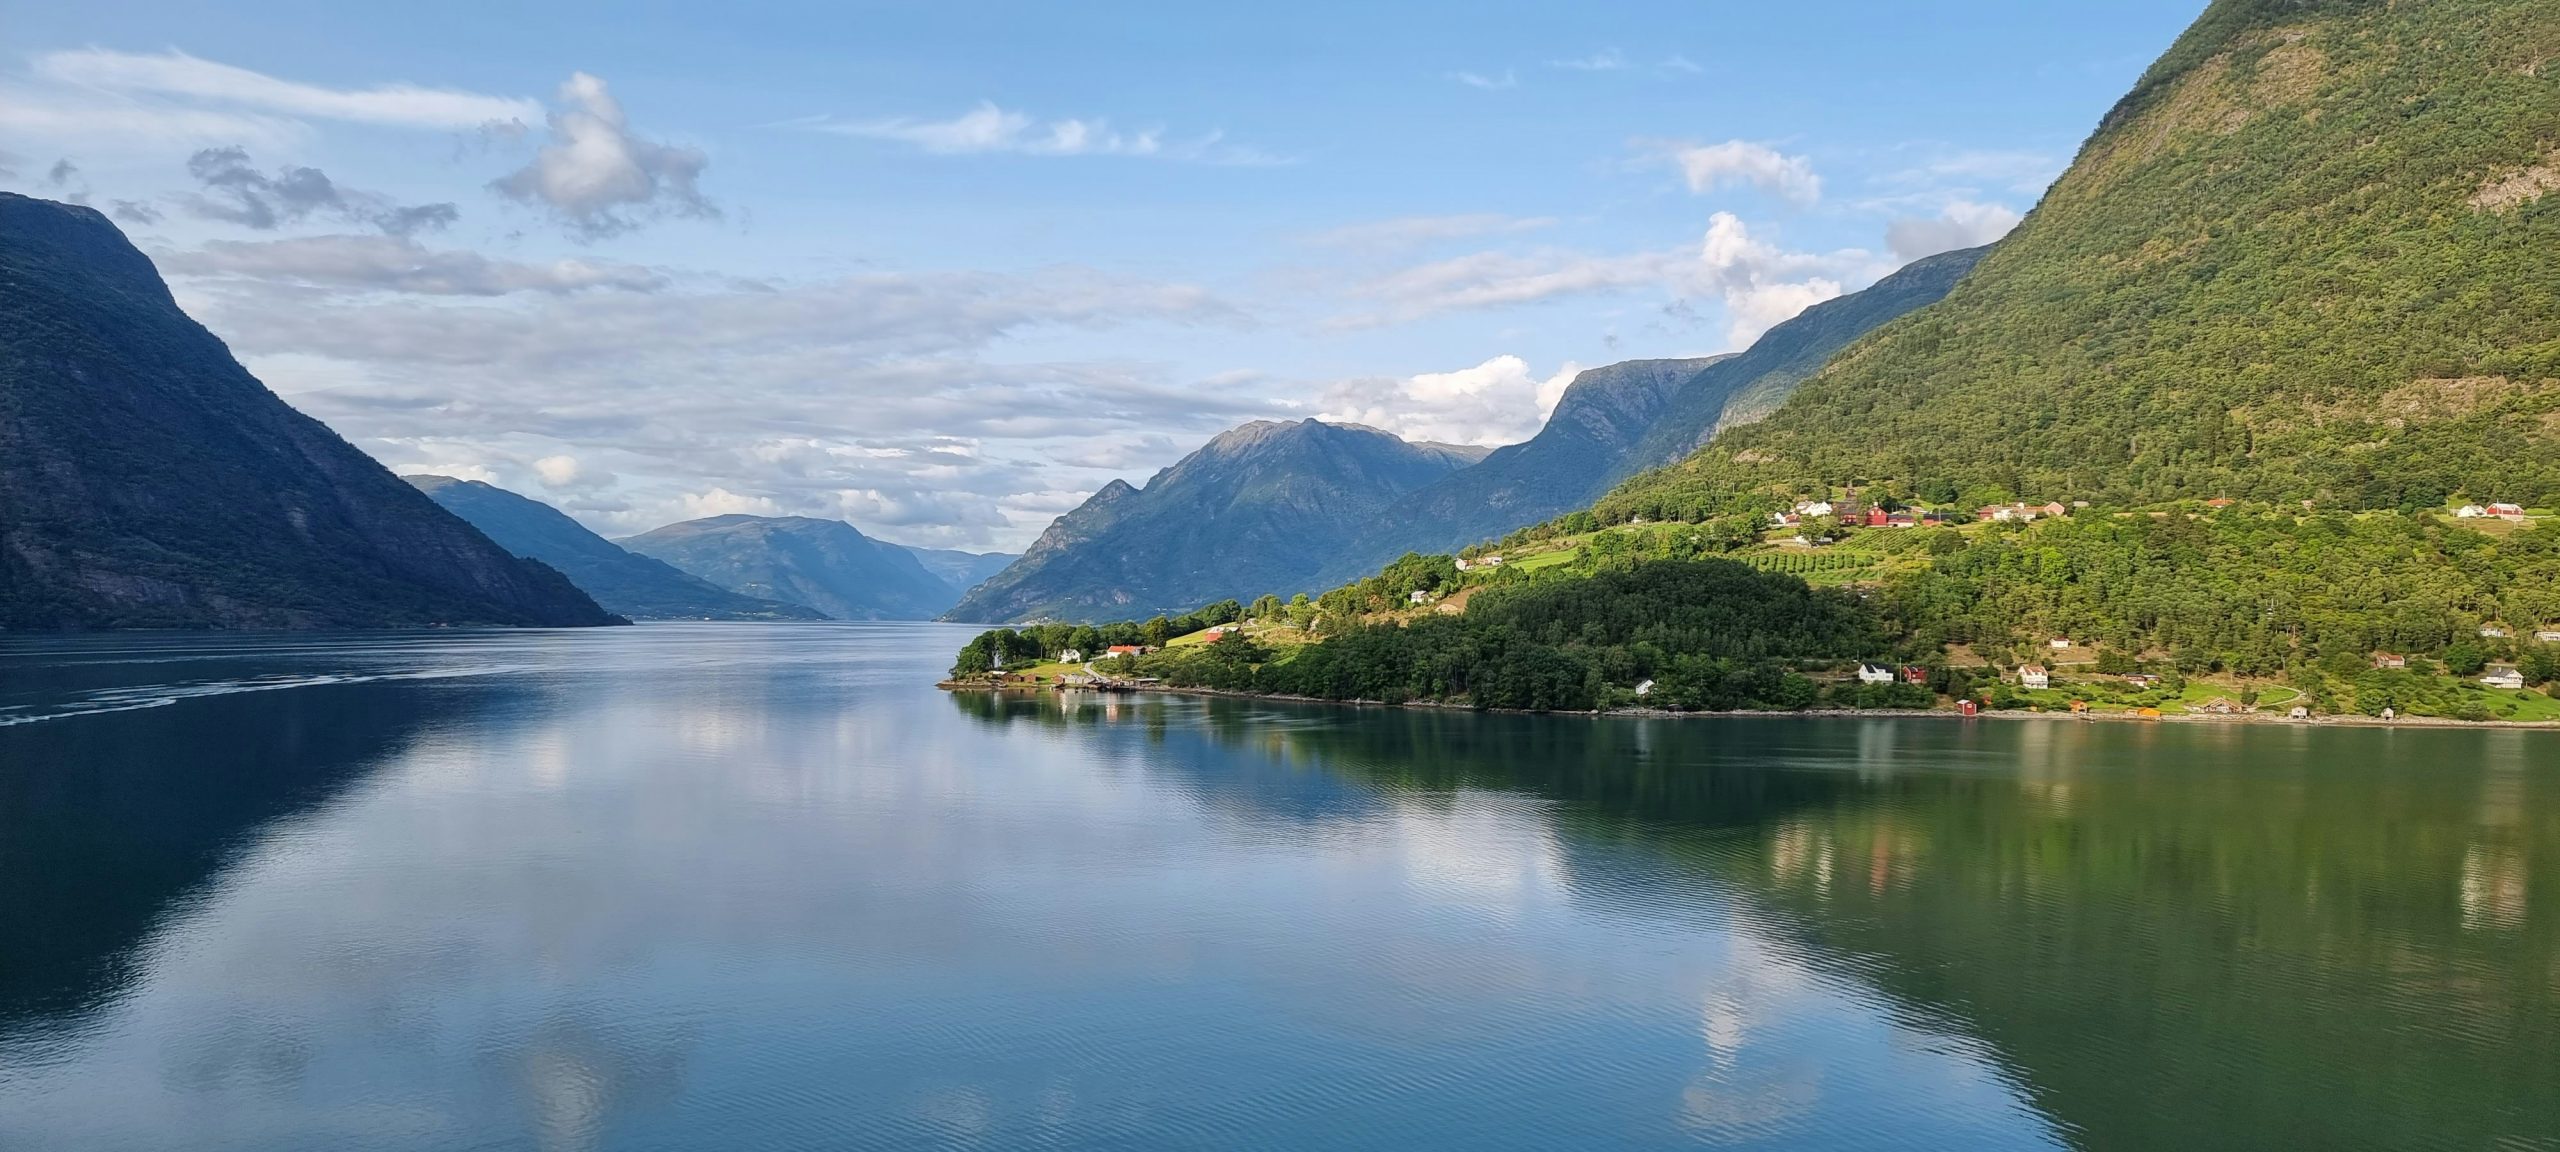 explore stunning fjords with our guided fjord cruises. book now for an unforgettable adventure through norway's breathtaking natural landscapes.